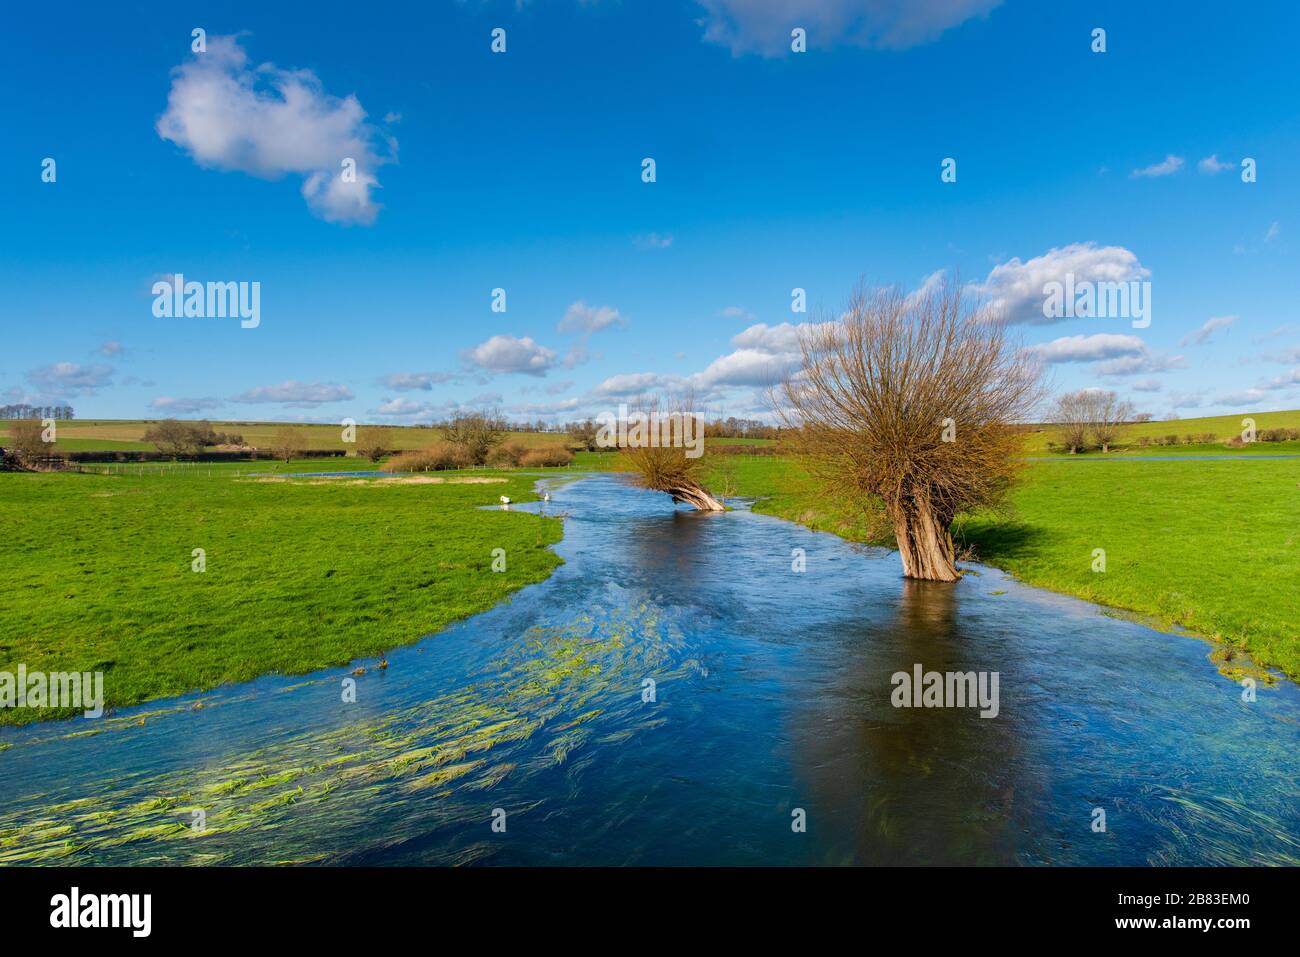 The River Till in flood at Winterbourne Stoke, Wiltshire, UK. A winterbourne is a stream that flows in winter, but is often dry in summer. Stock Photo